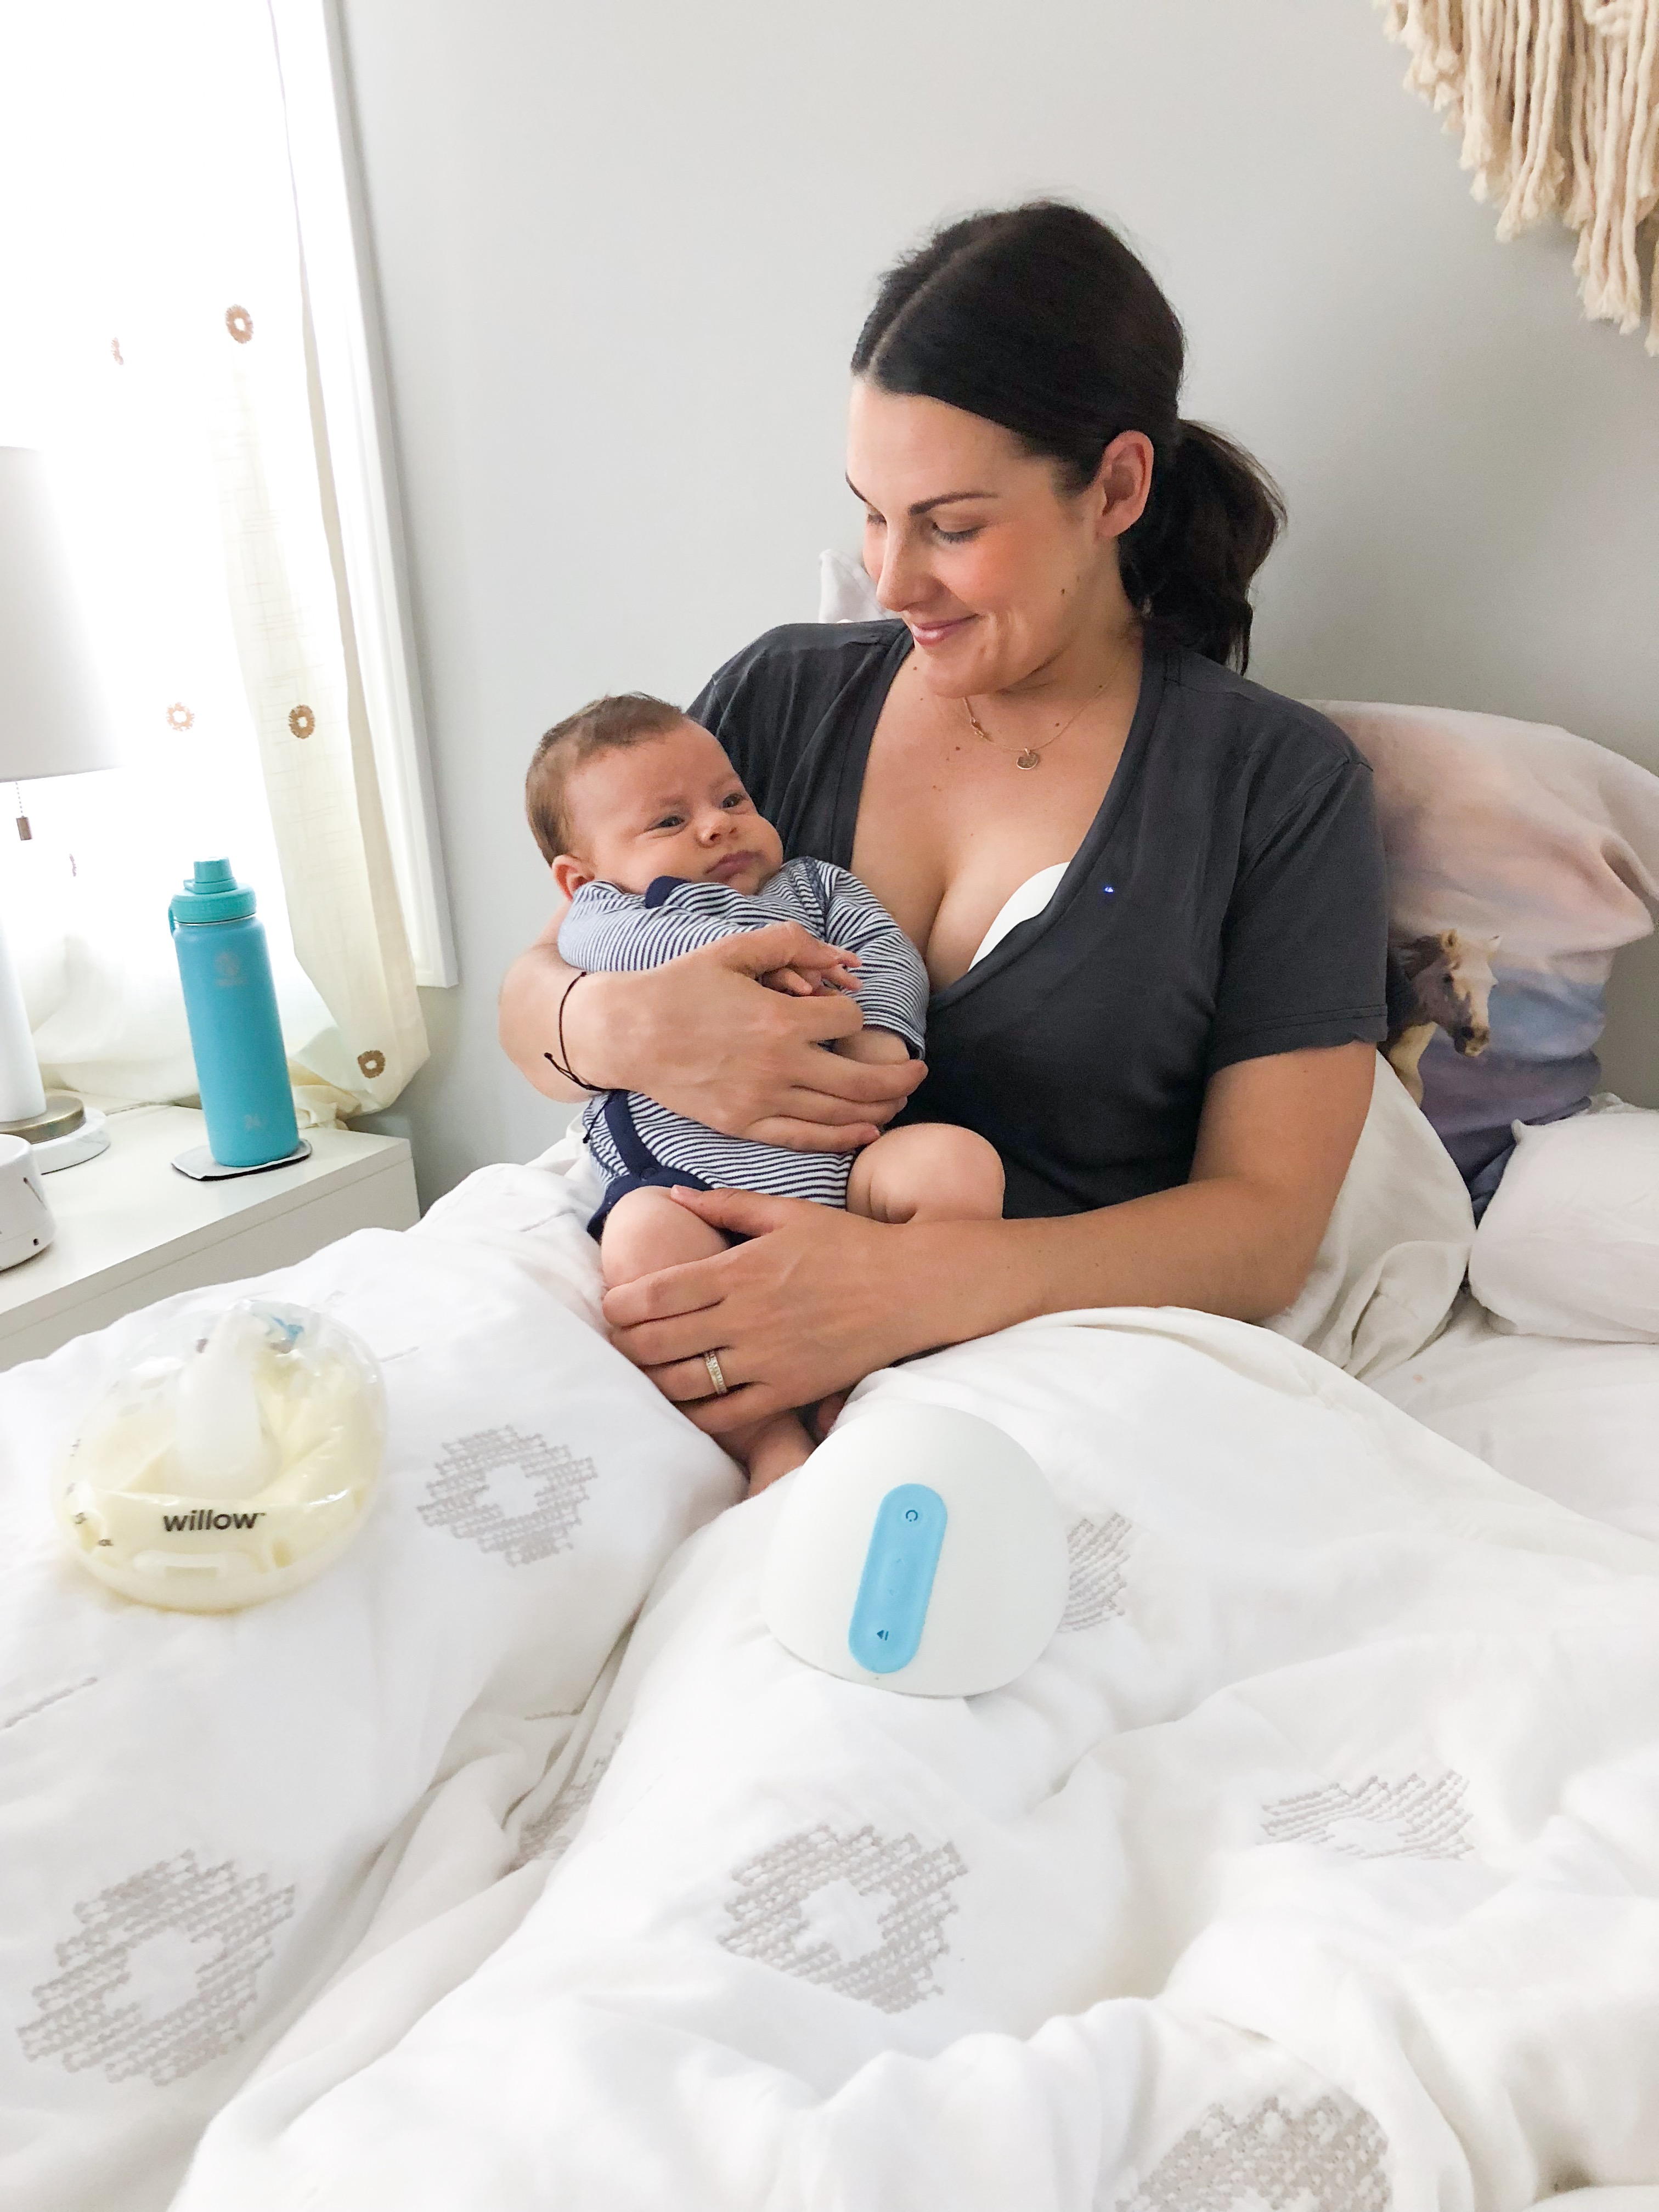 Willow Breast Pump Review with photos - Whitney E. RD